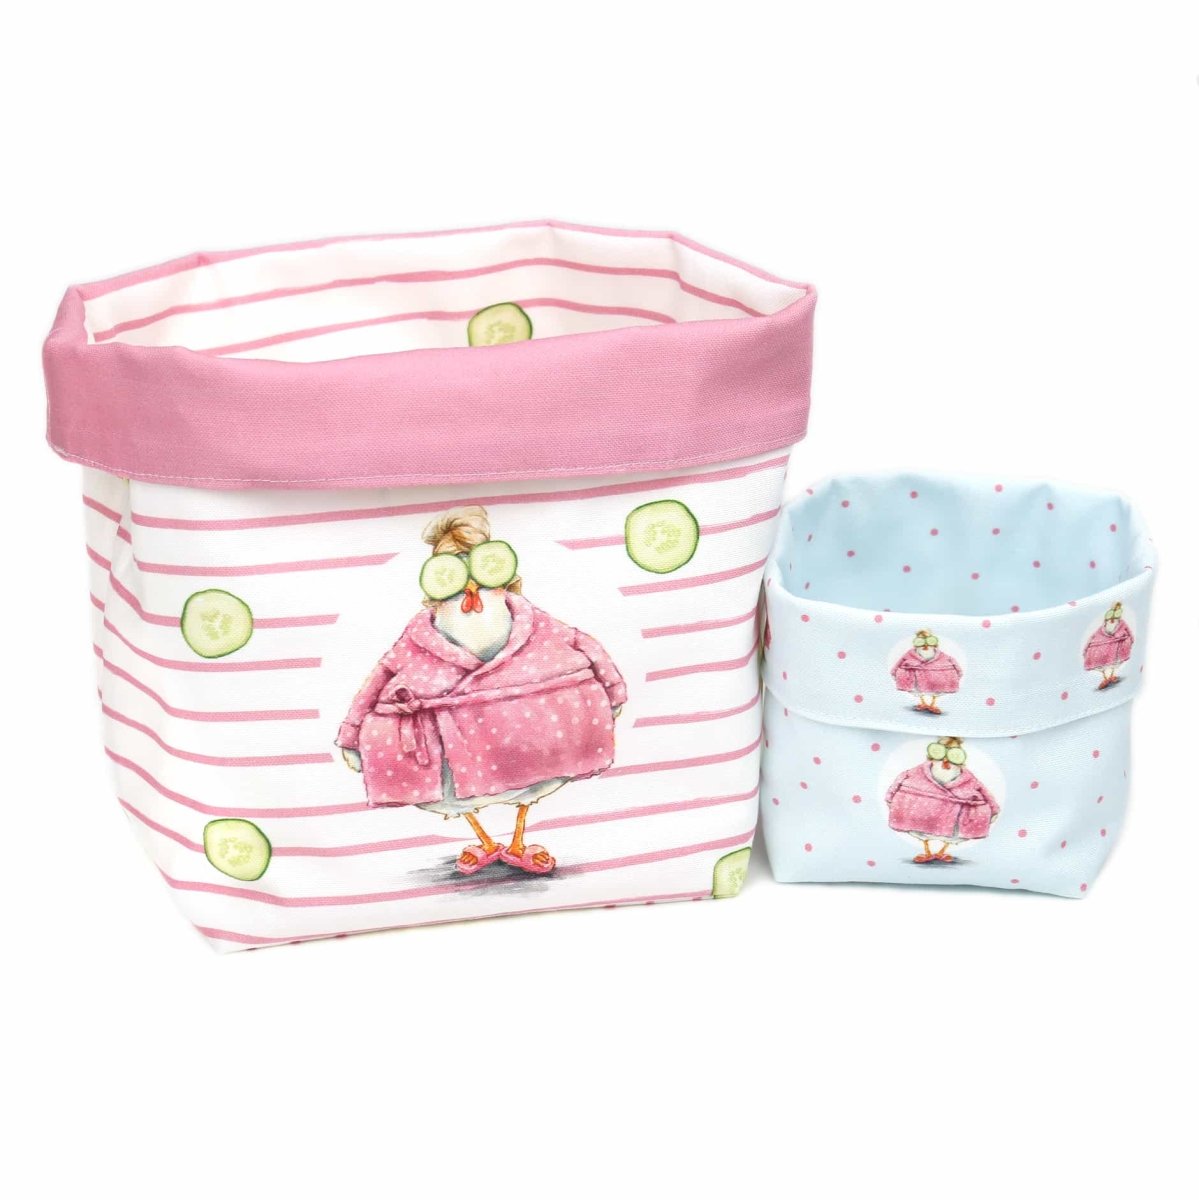 DIY Basket Set - Spa Chick - By Abby and Me - Art & Craft Kits - Bibs And Boots Fabric